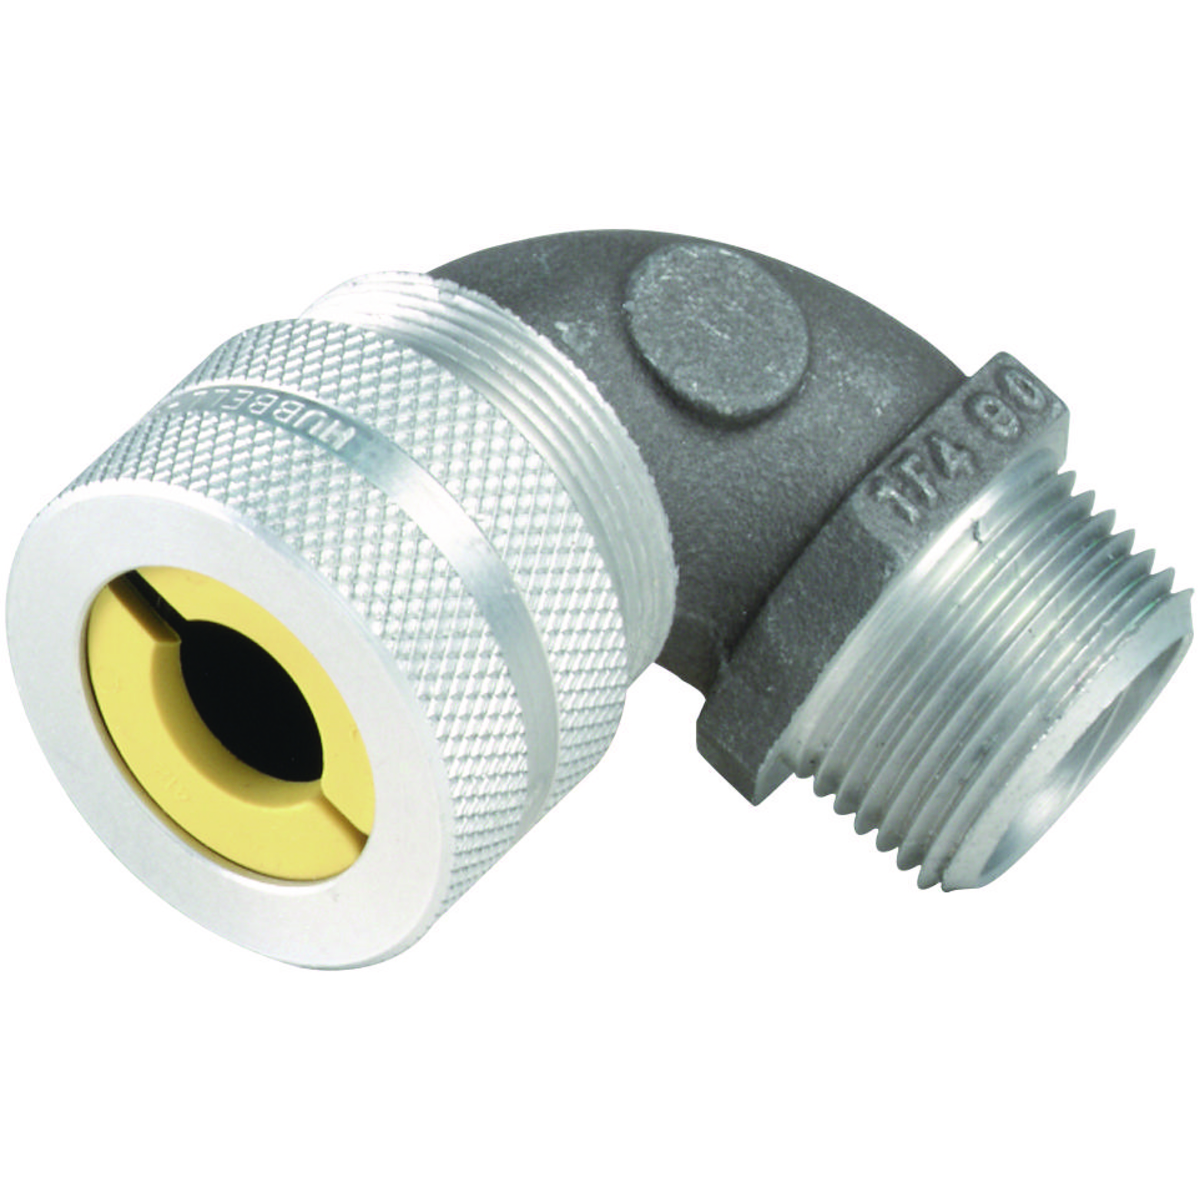 Z SERIES - ALUMINUM INCREASED SAFETY 90-DEGREE CORD CONNECTOR - PURPLECORD RANGE 0.750 TO 0.875 - HUB SIZE 3/4 INCH NPT